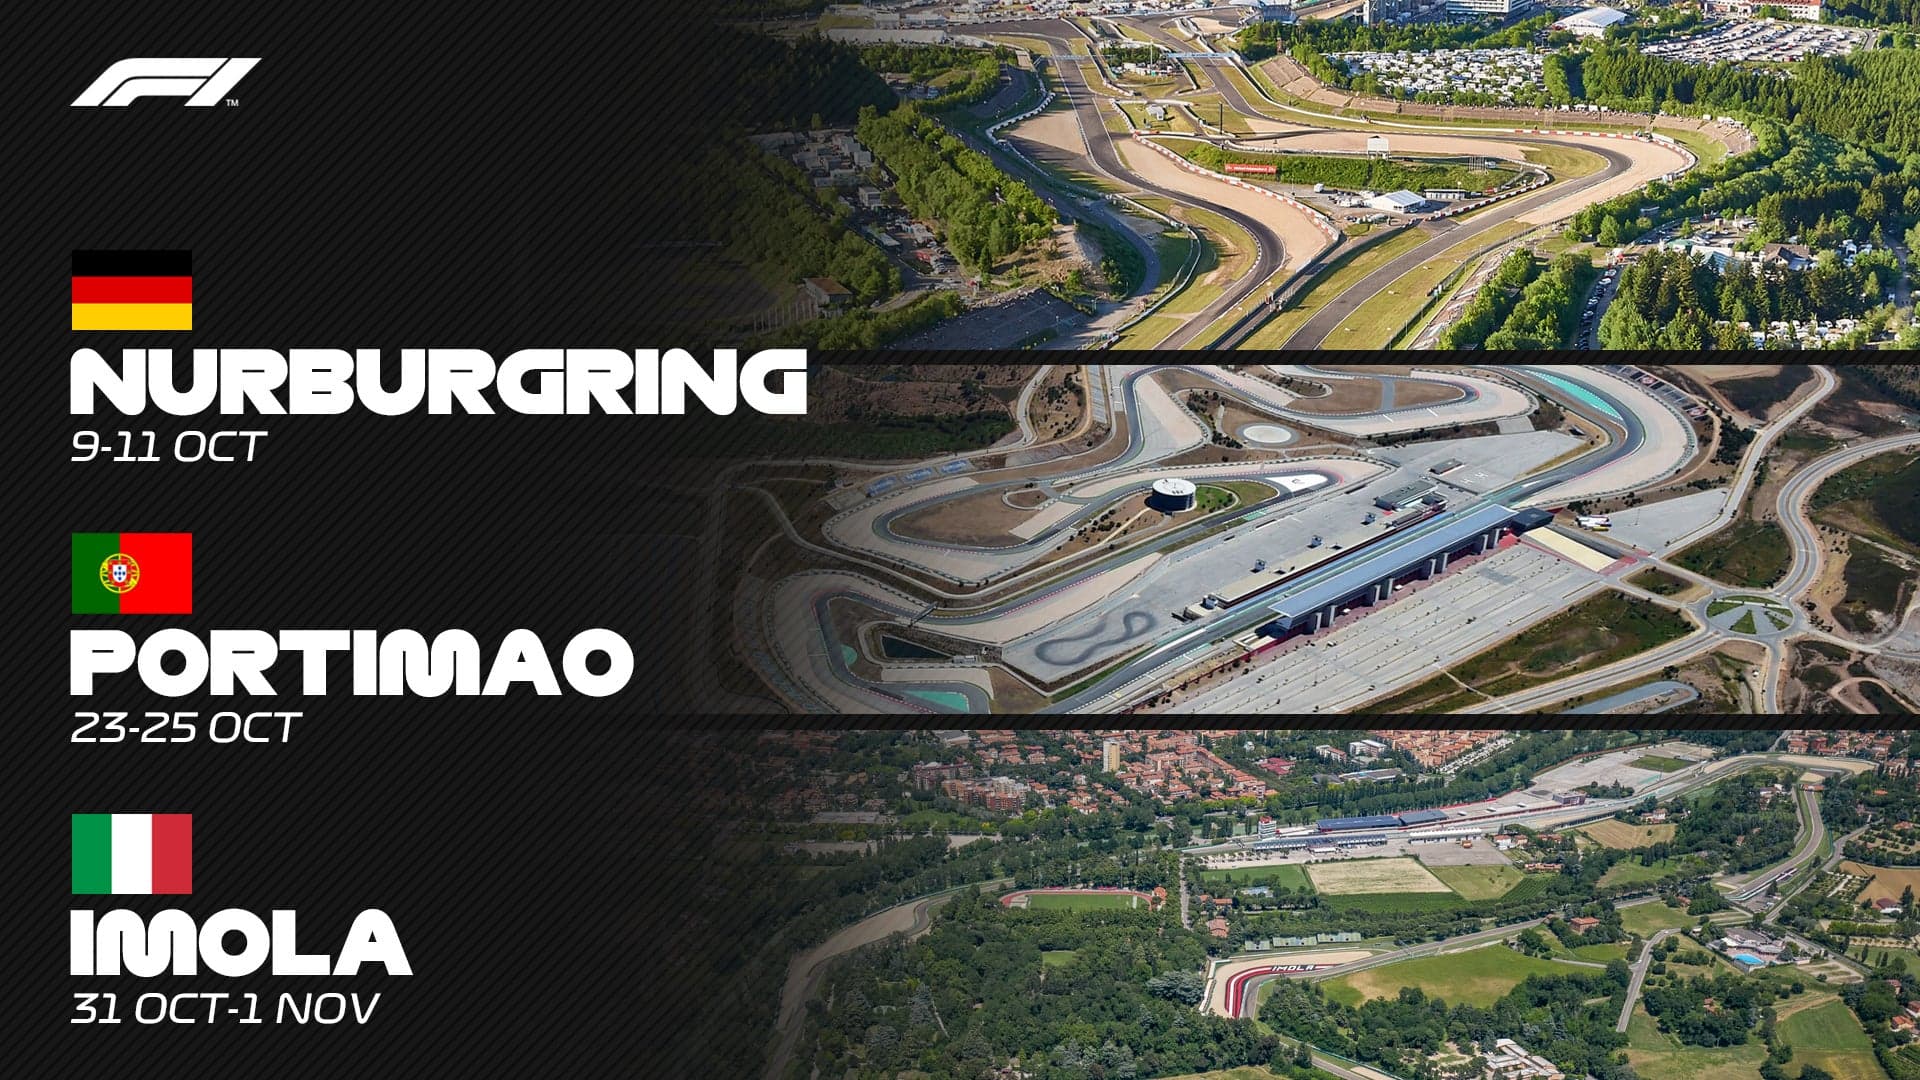 F1 Racing Returns to Nurburgring, Imola, and Portugal Later This Year